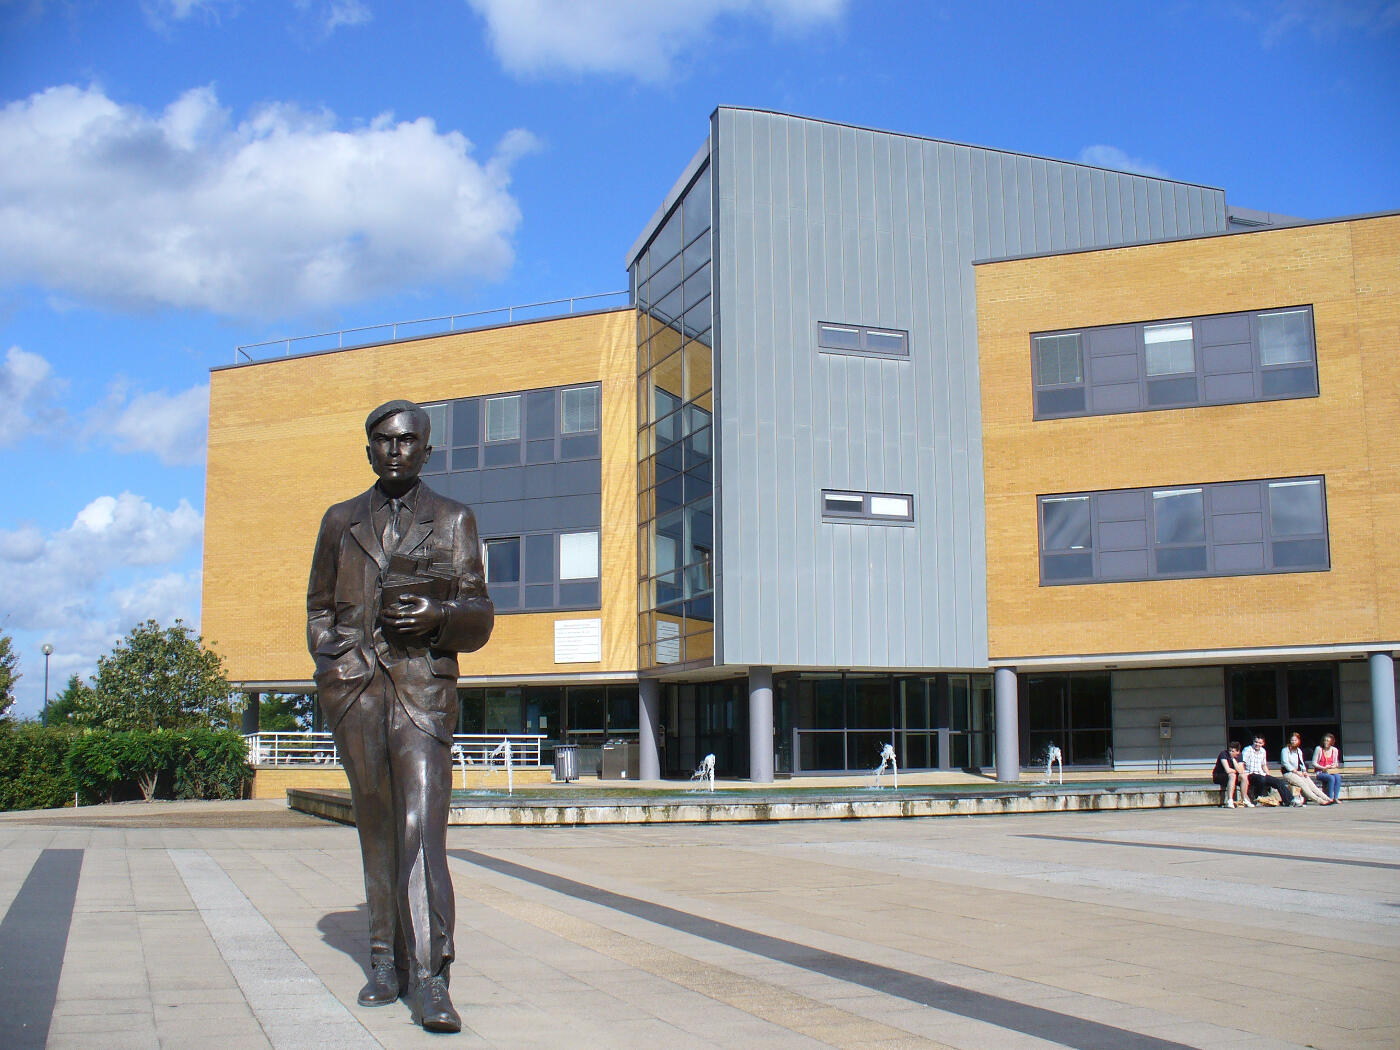 Statue of Alan Turing stanidng in front of building